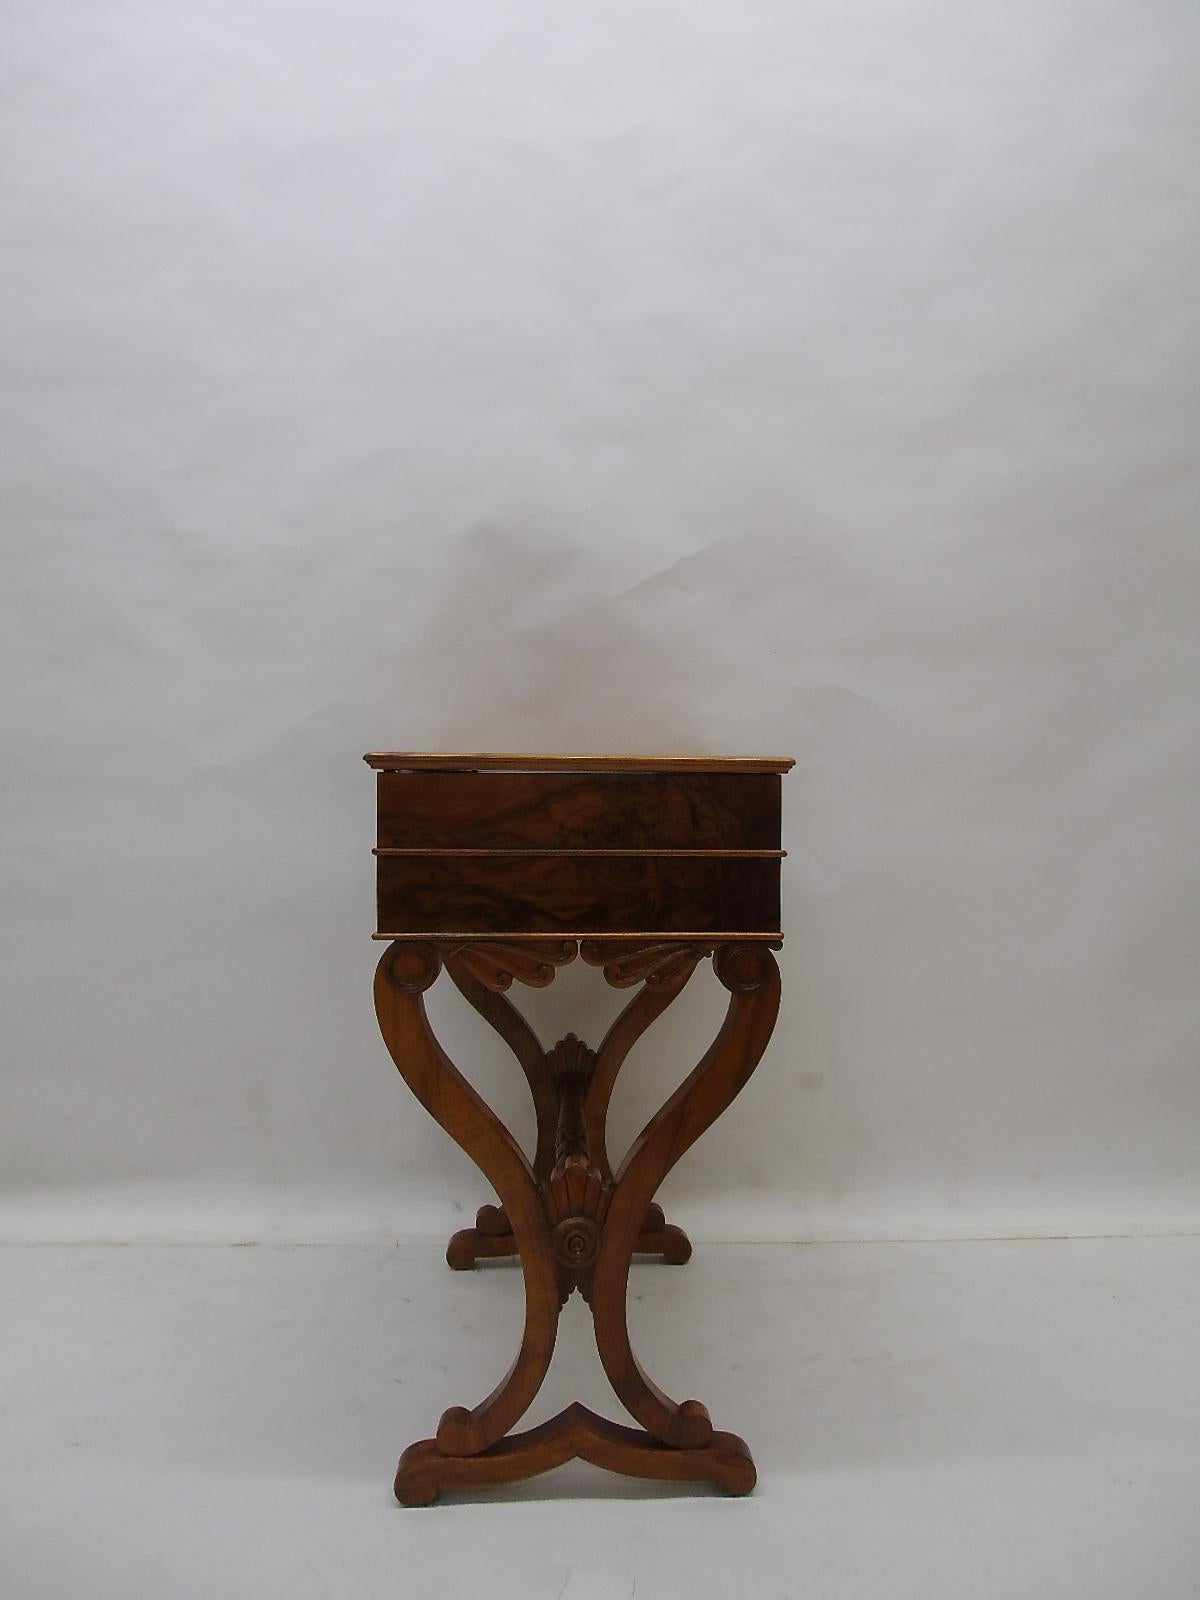 German Walnut and Maple Biedermeier Sewing Table or Side Table, circa 1830